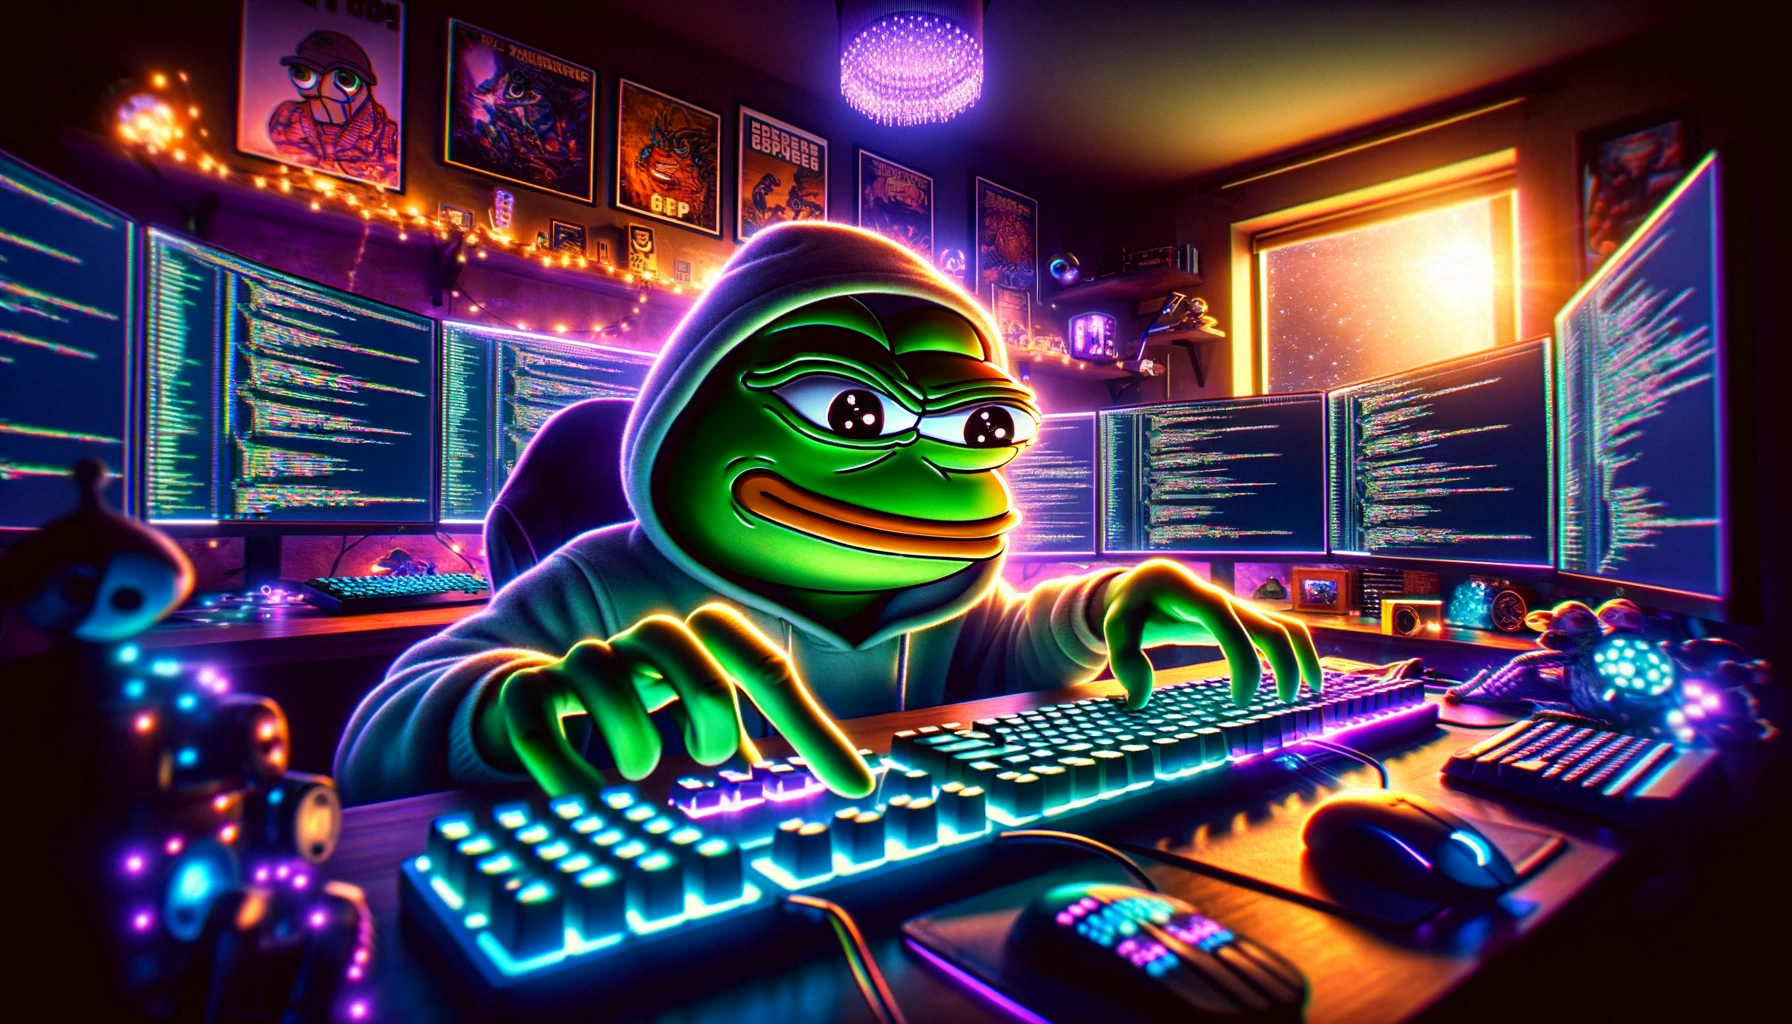 Absurd prompt hack brings Pepe the Frog back to DALL-E 3 for ChatGPT